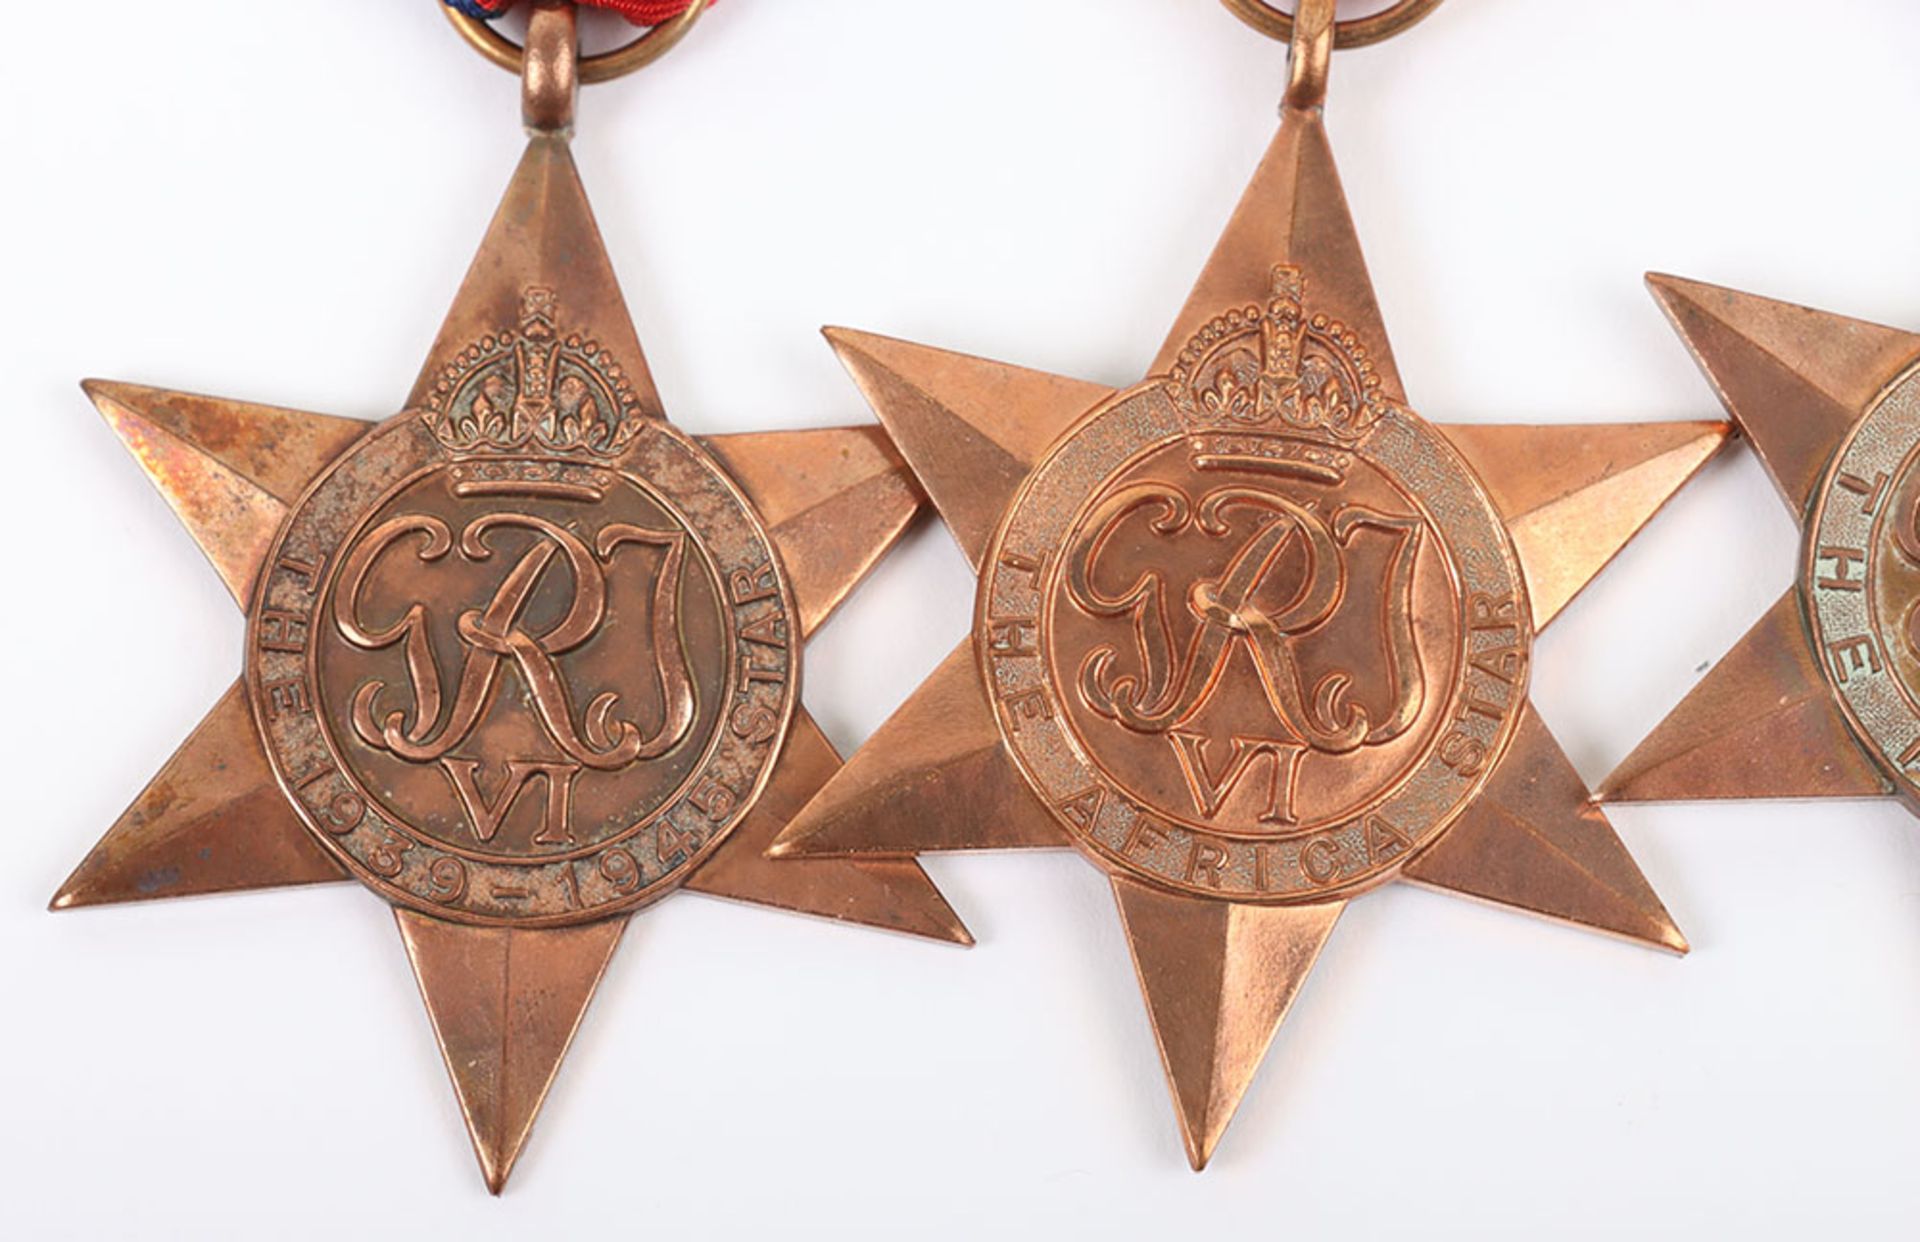 Group of 4 Attributed WW2 Medals - Image 4 of 9